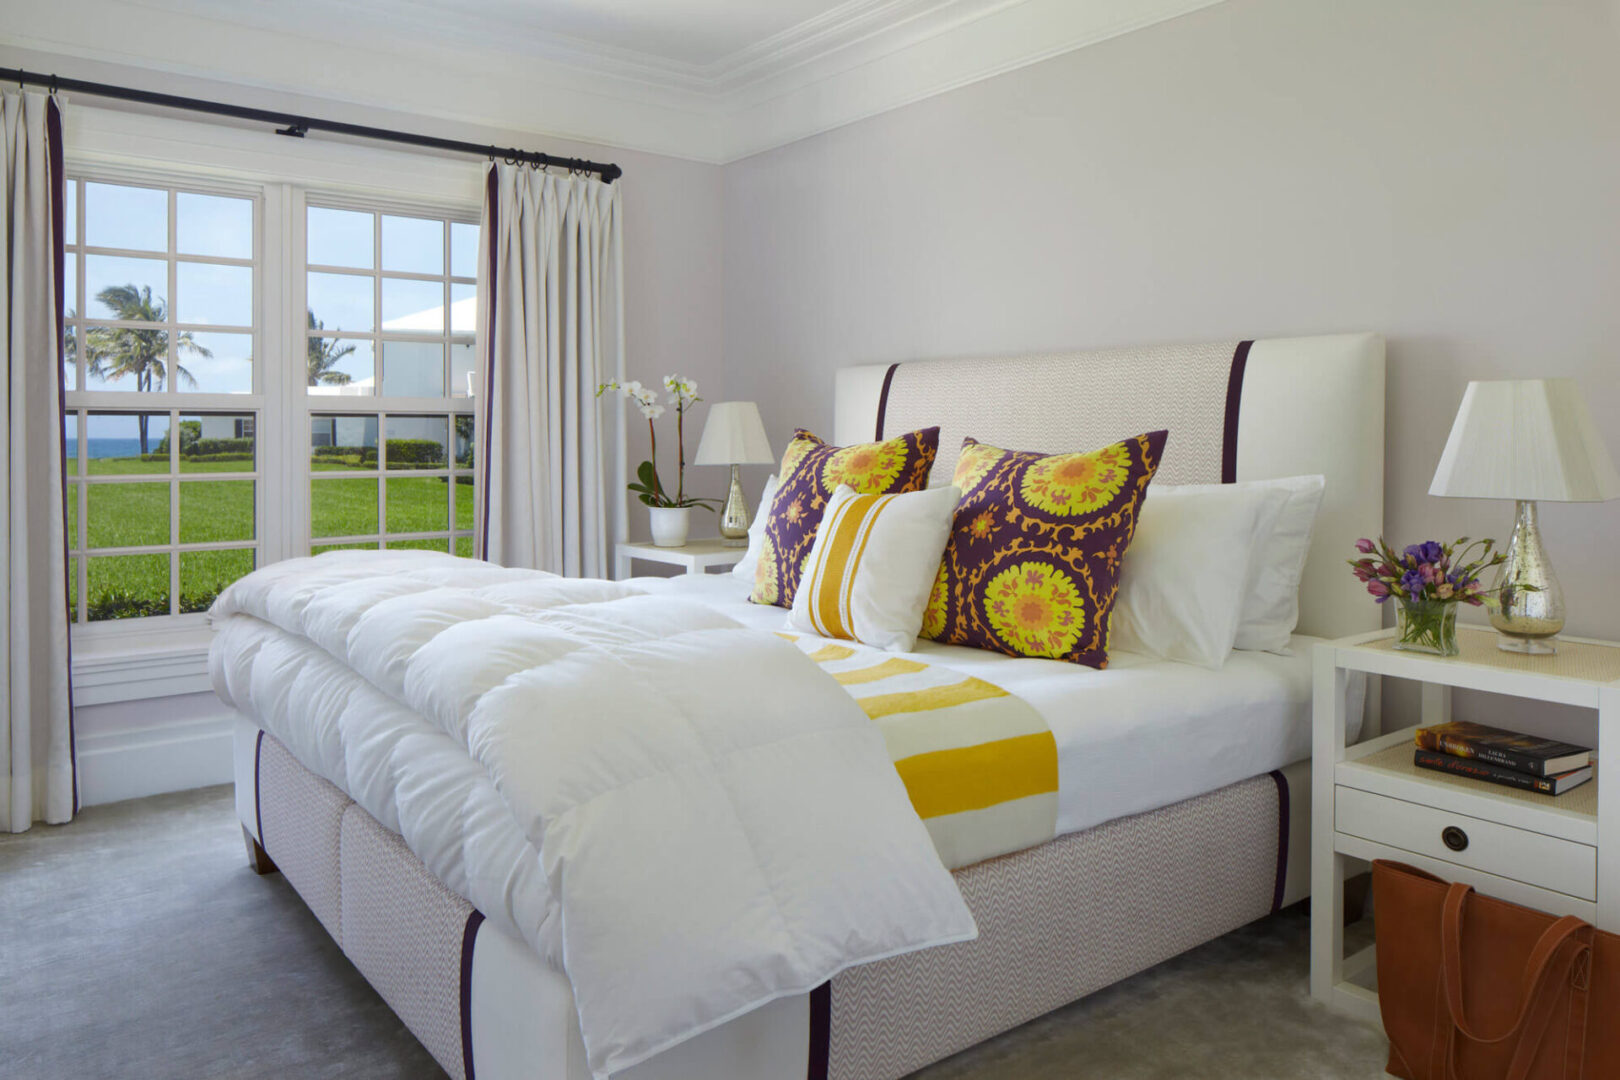 A bedroom with white walls and yellow accents.